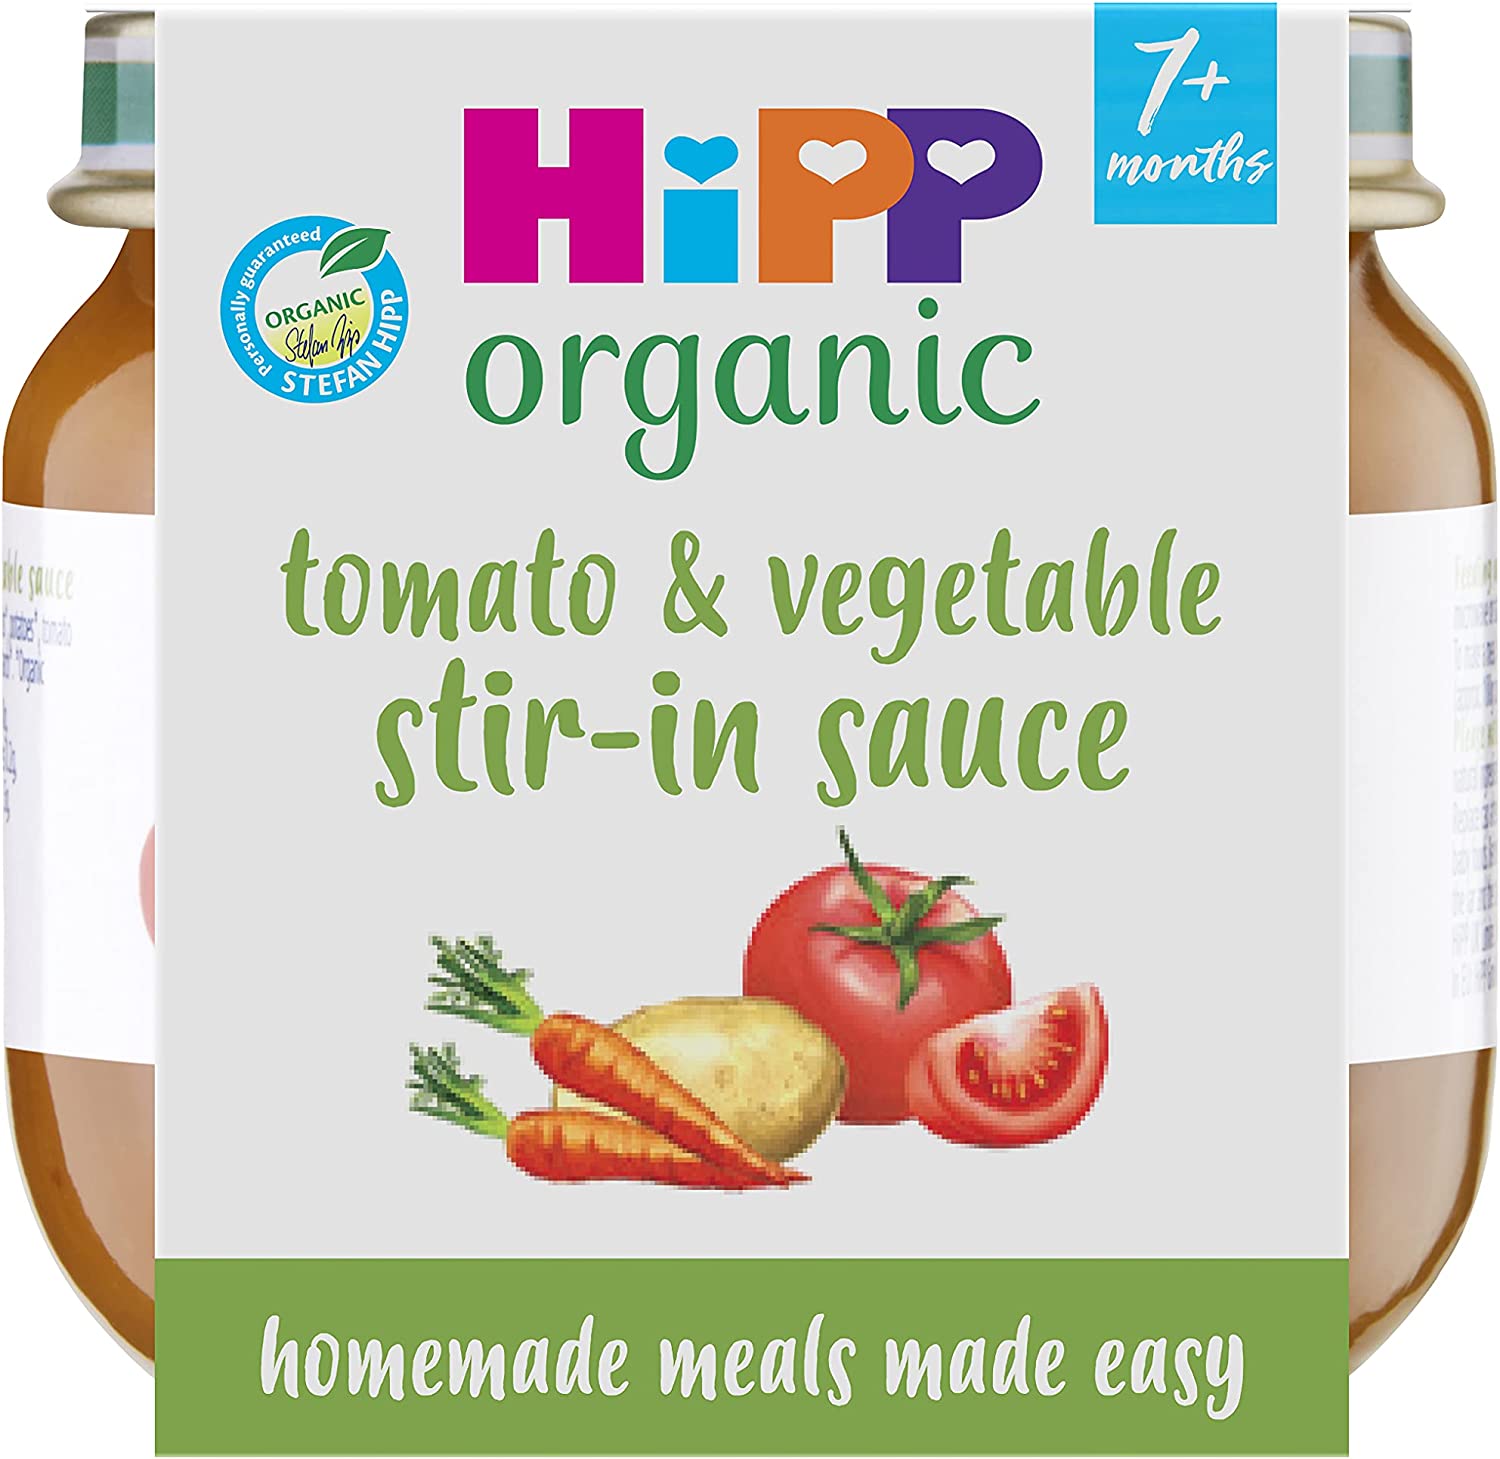 Hipp Organic Little Mealmakers Tomato & Vegetable Stir-In Sauce 80g RRP £1.25 CLEARANCE XL 59p or 2 for £1